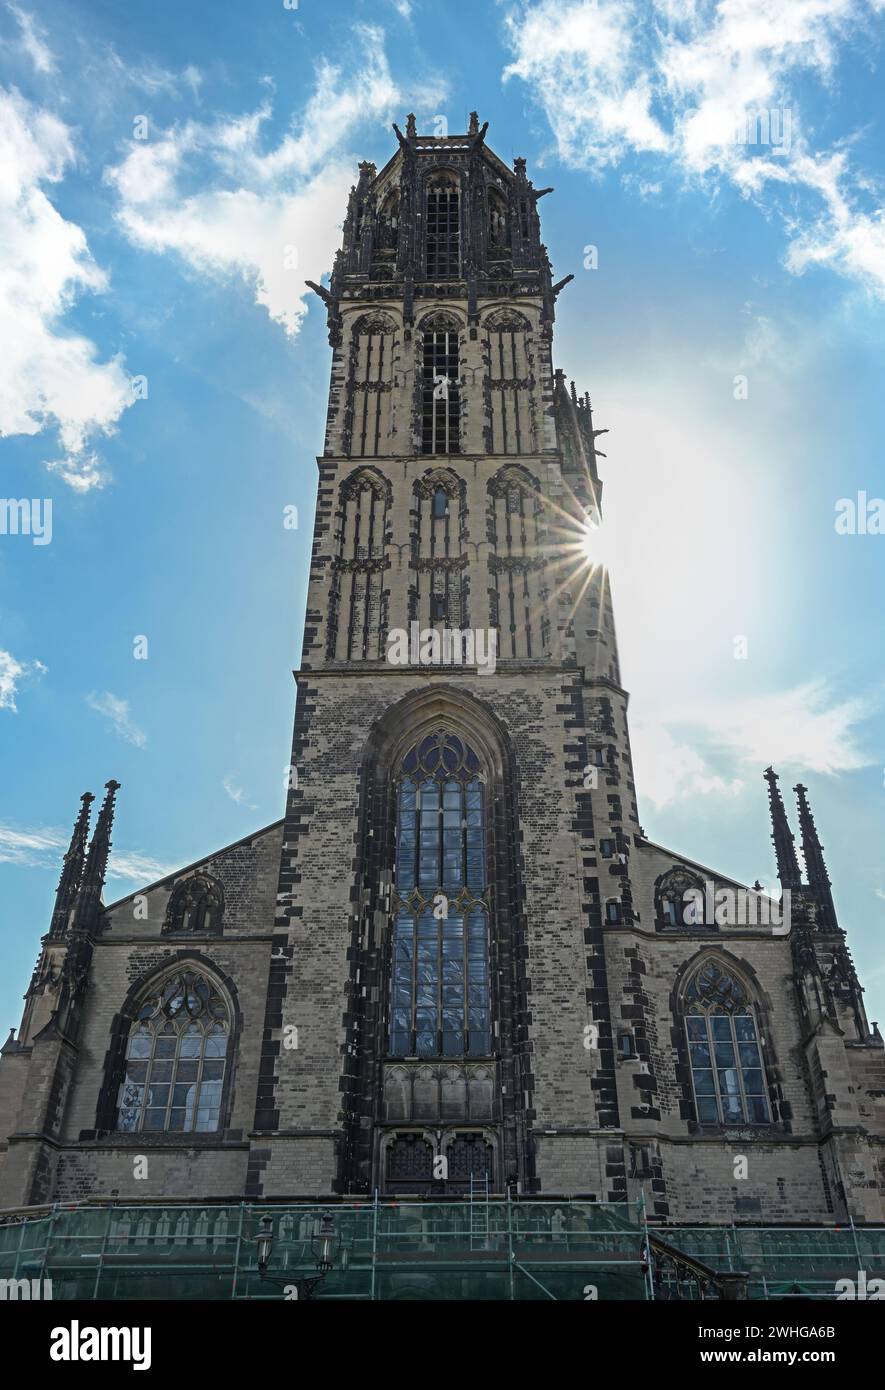 Tower of the St. Salvator Church Duisburg, the Gothic basilica is today a Protestant city church, blue sky with white clouds, Ge Stock Photo